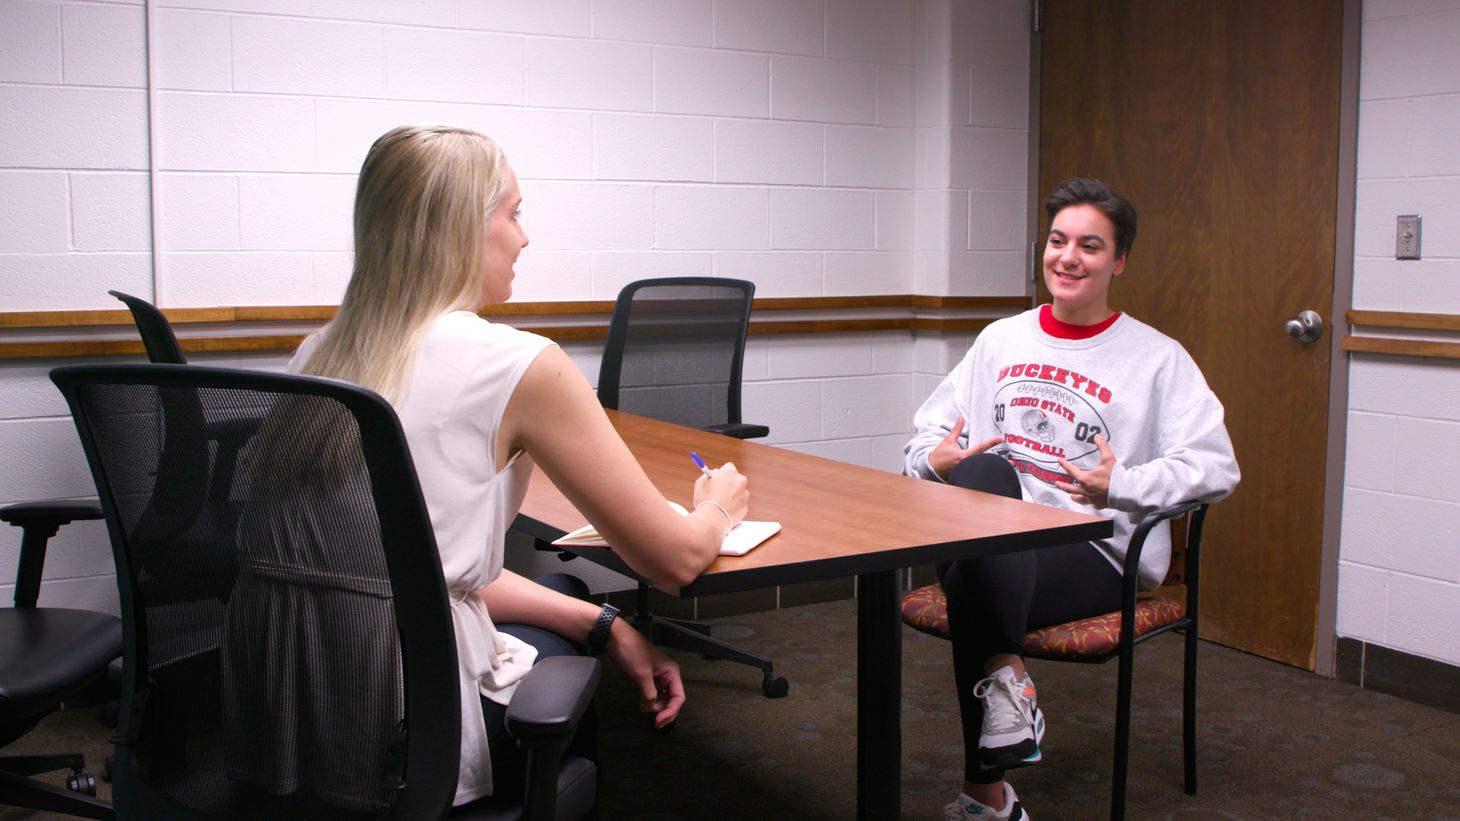 Mary Trabue speaks with a counselor at The Ohio State University. After struggling with the stress and anxiety of the pandemic and virtual learning, Mary has learned healthy coping mechanisms that help when she’s feeling overwhelmed.